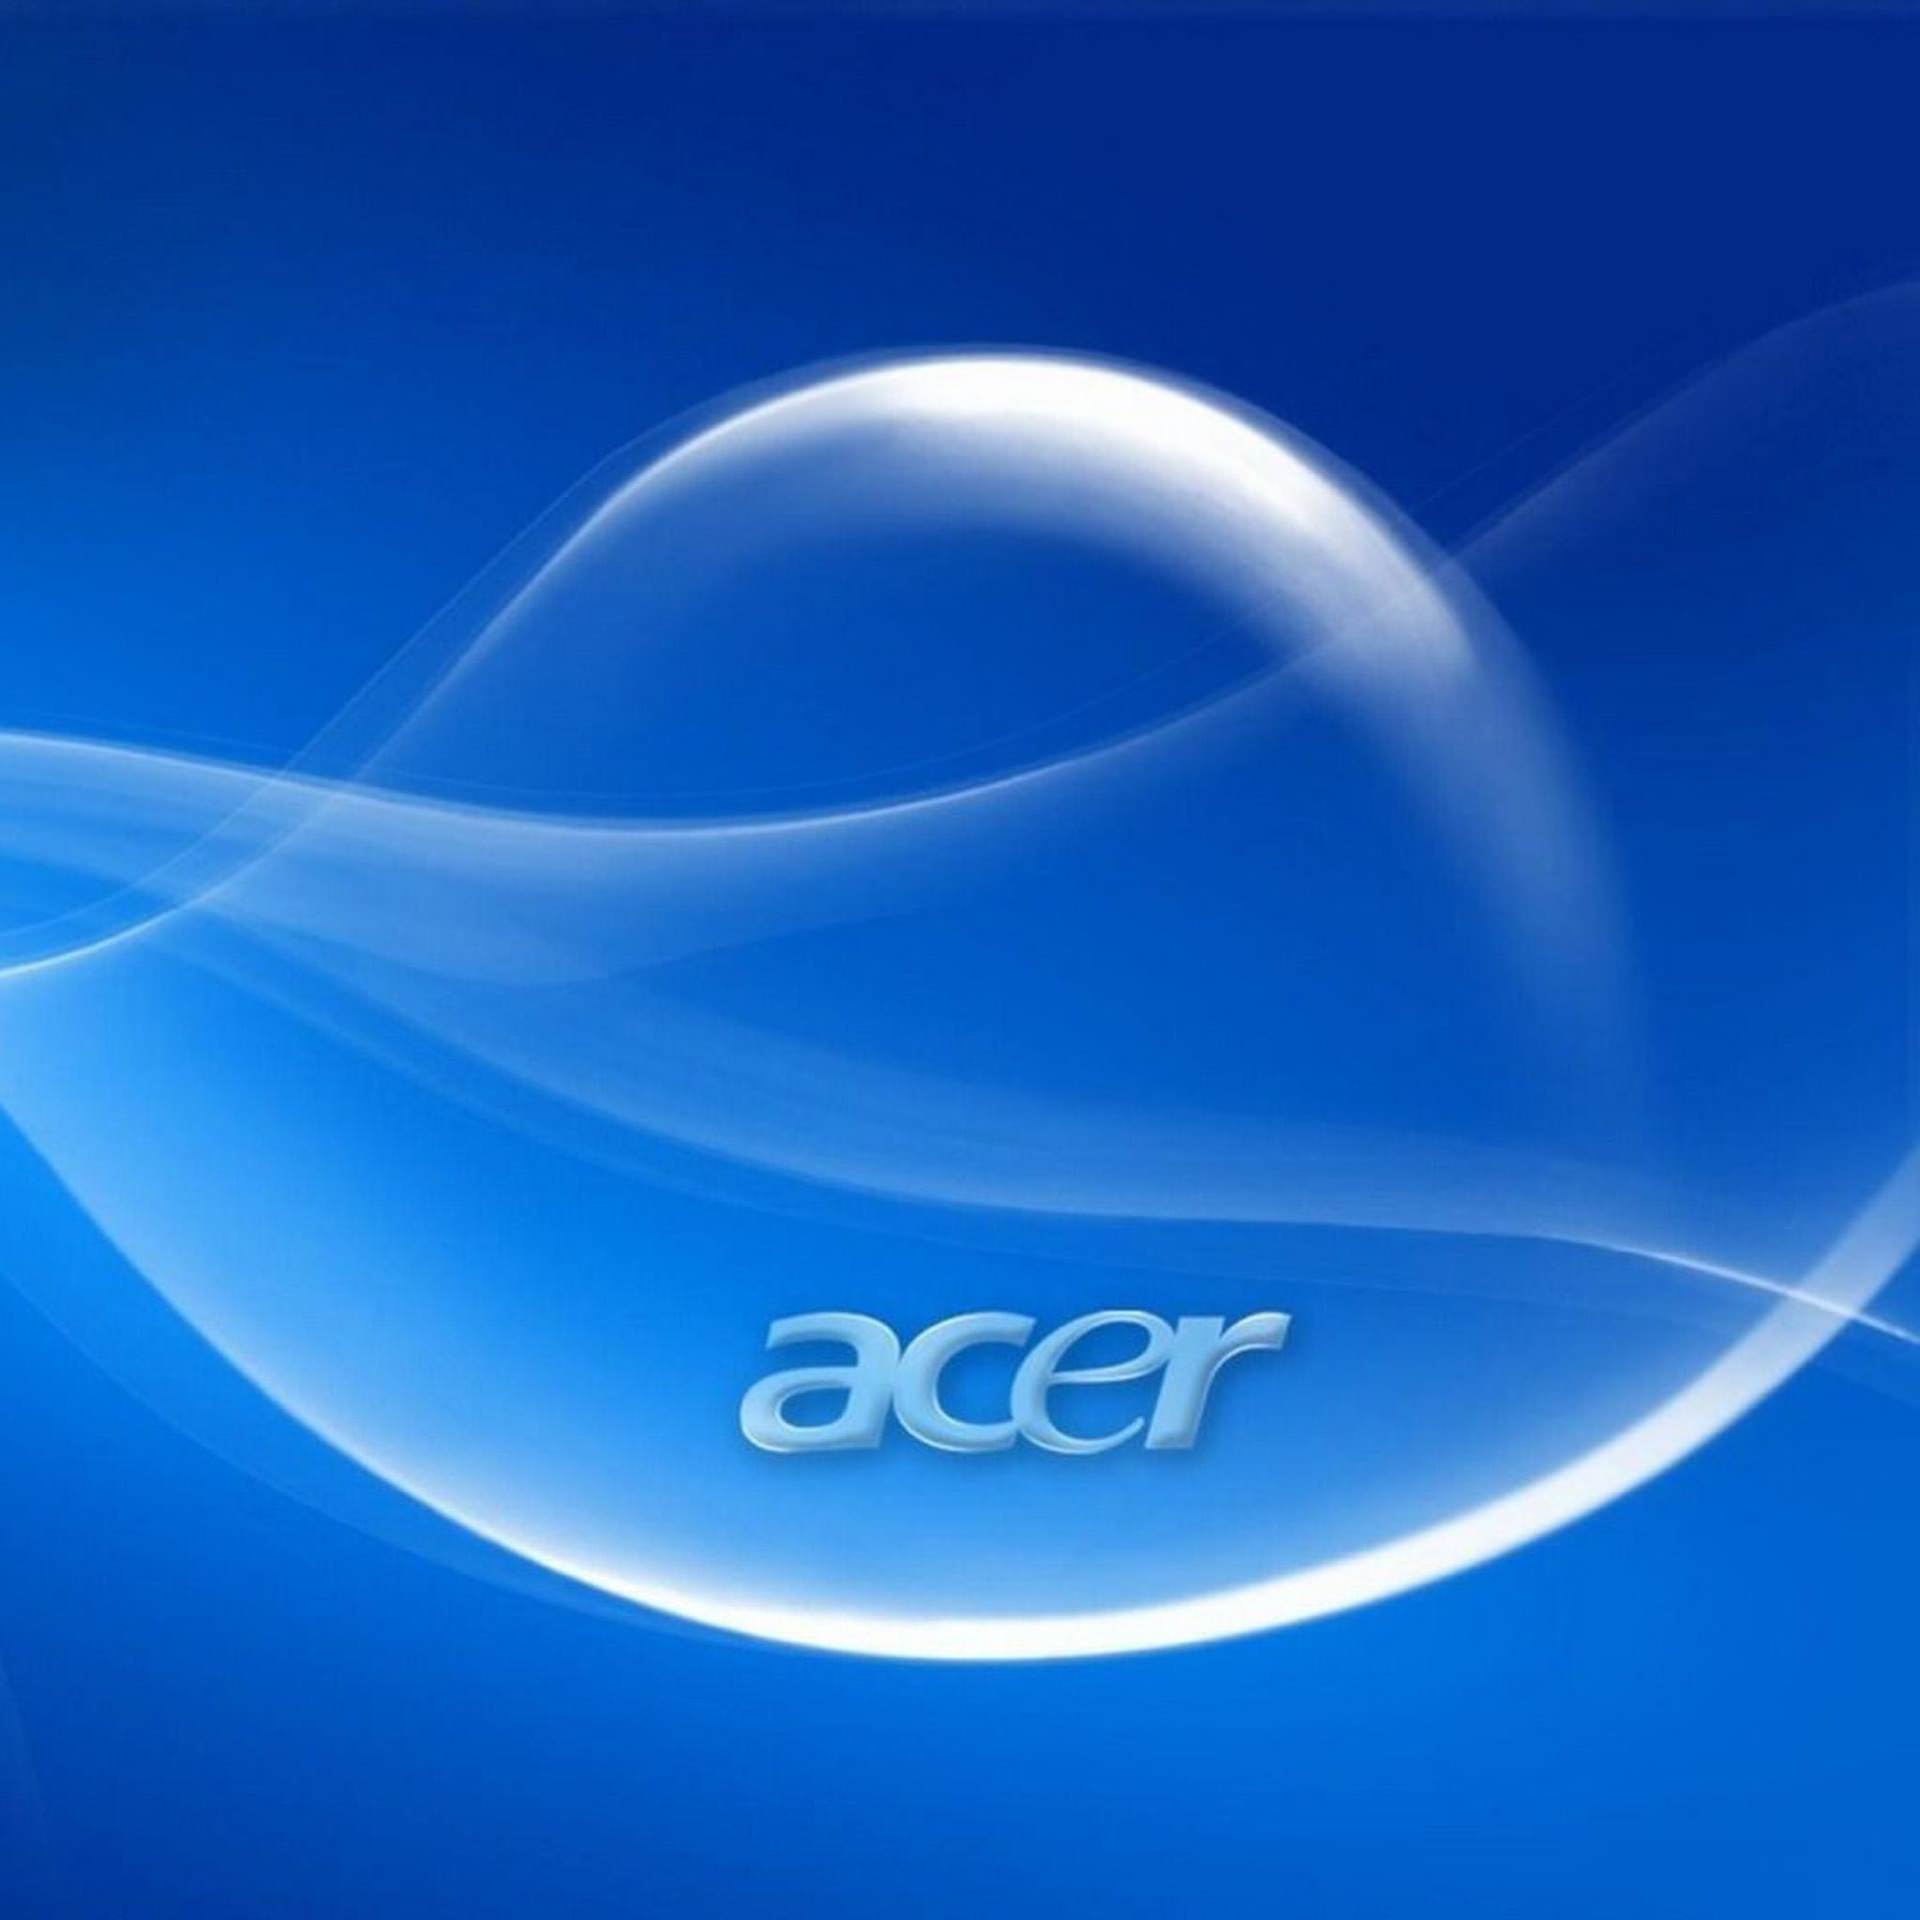 Acer Windows Computer Logo Ident Effects - YouTube